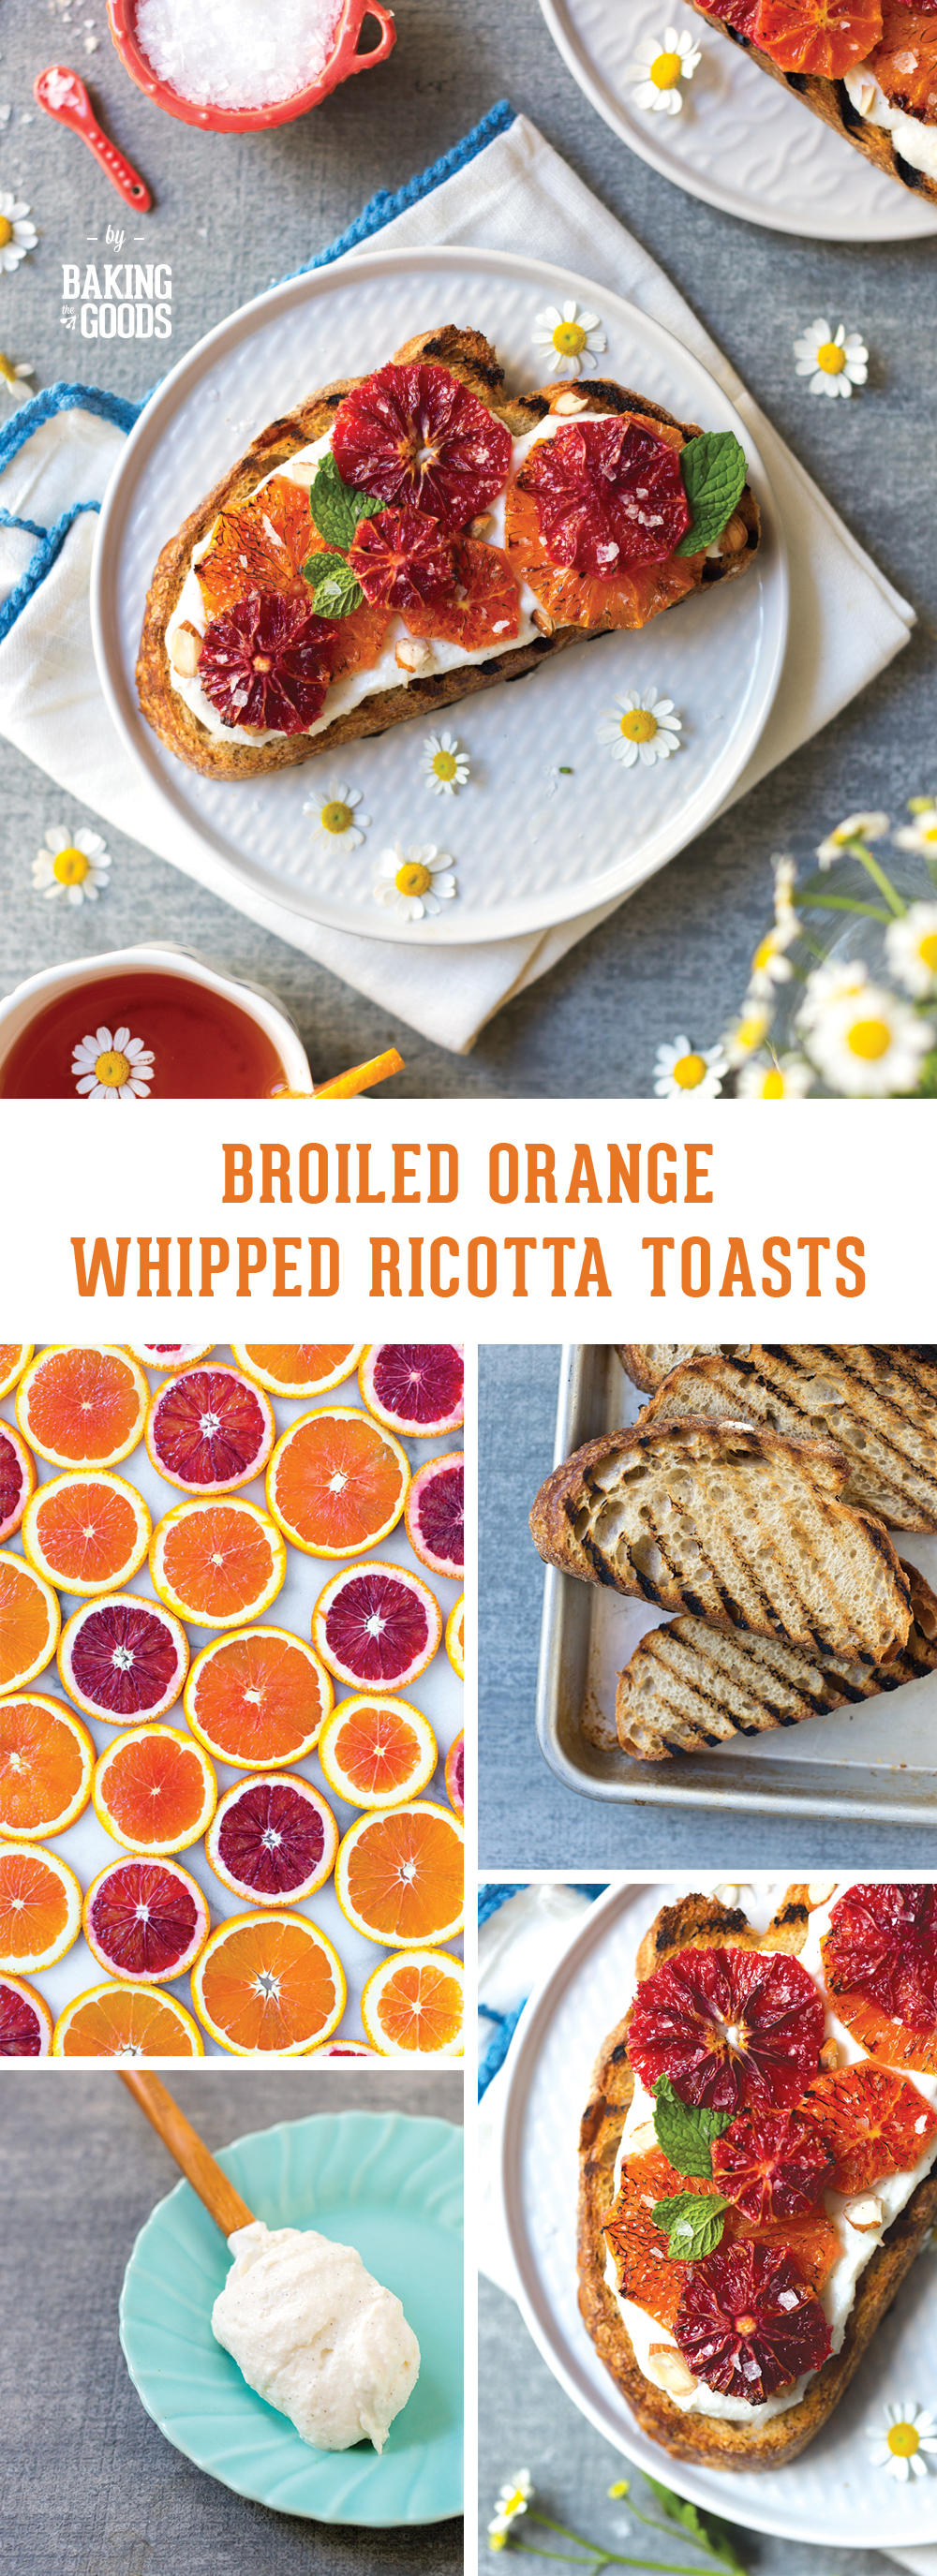 Broiled Orange Whipped Ricotta Toasts by Baking The Goods